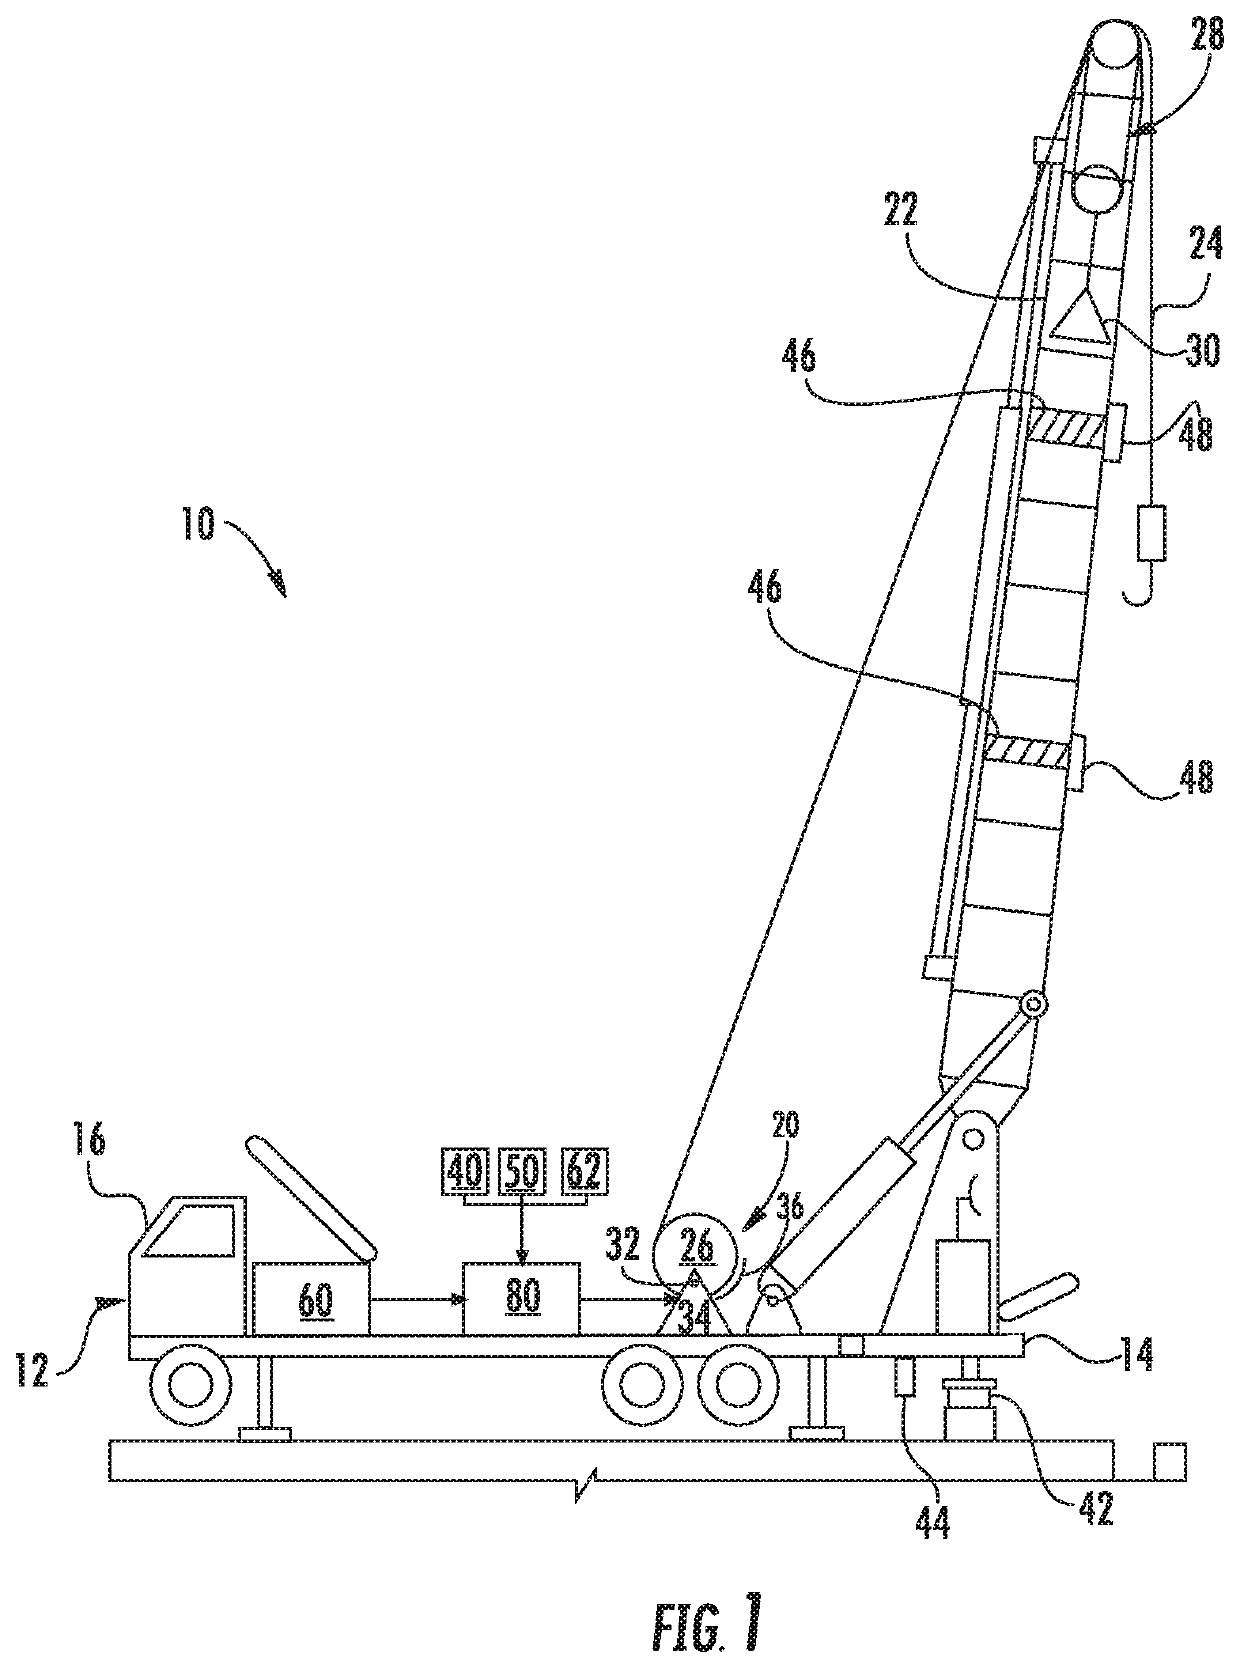 Drill rig and method for operating a drill rig